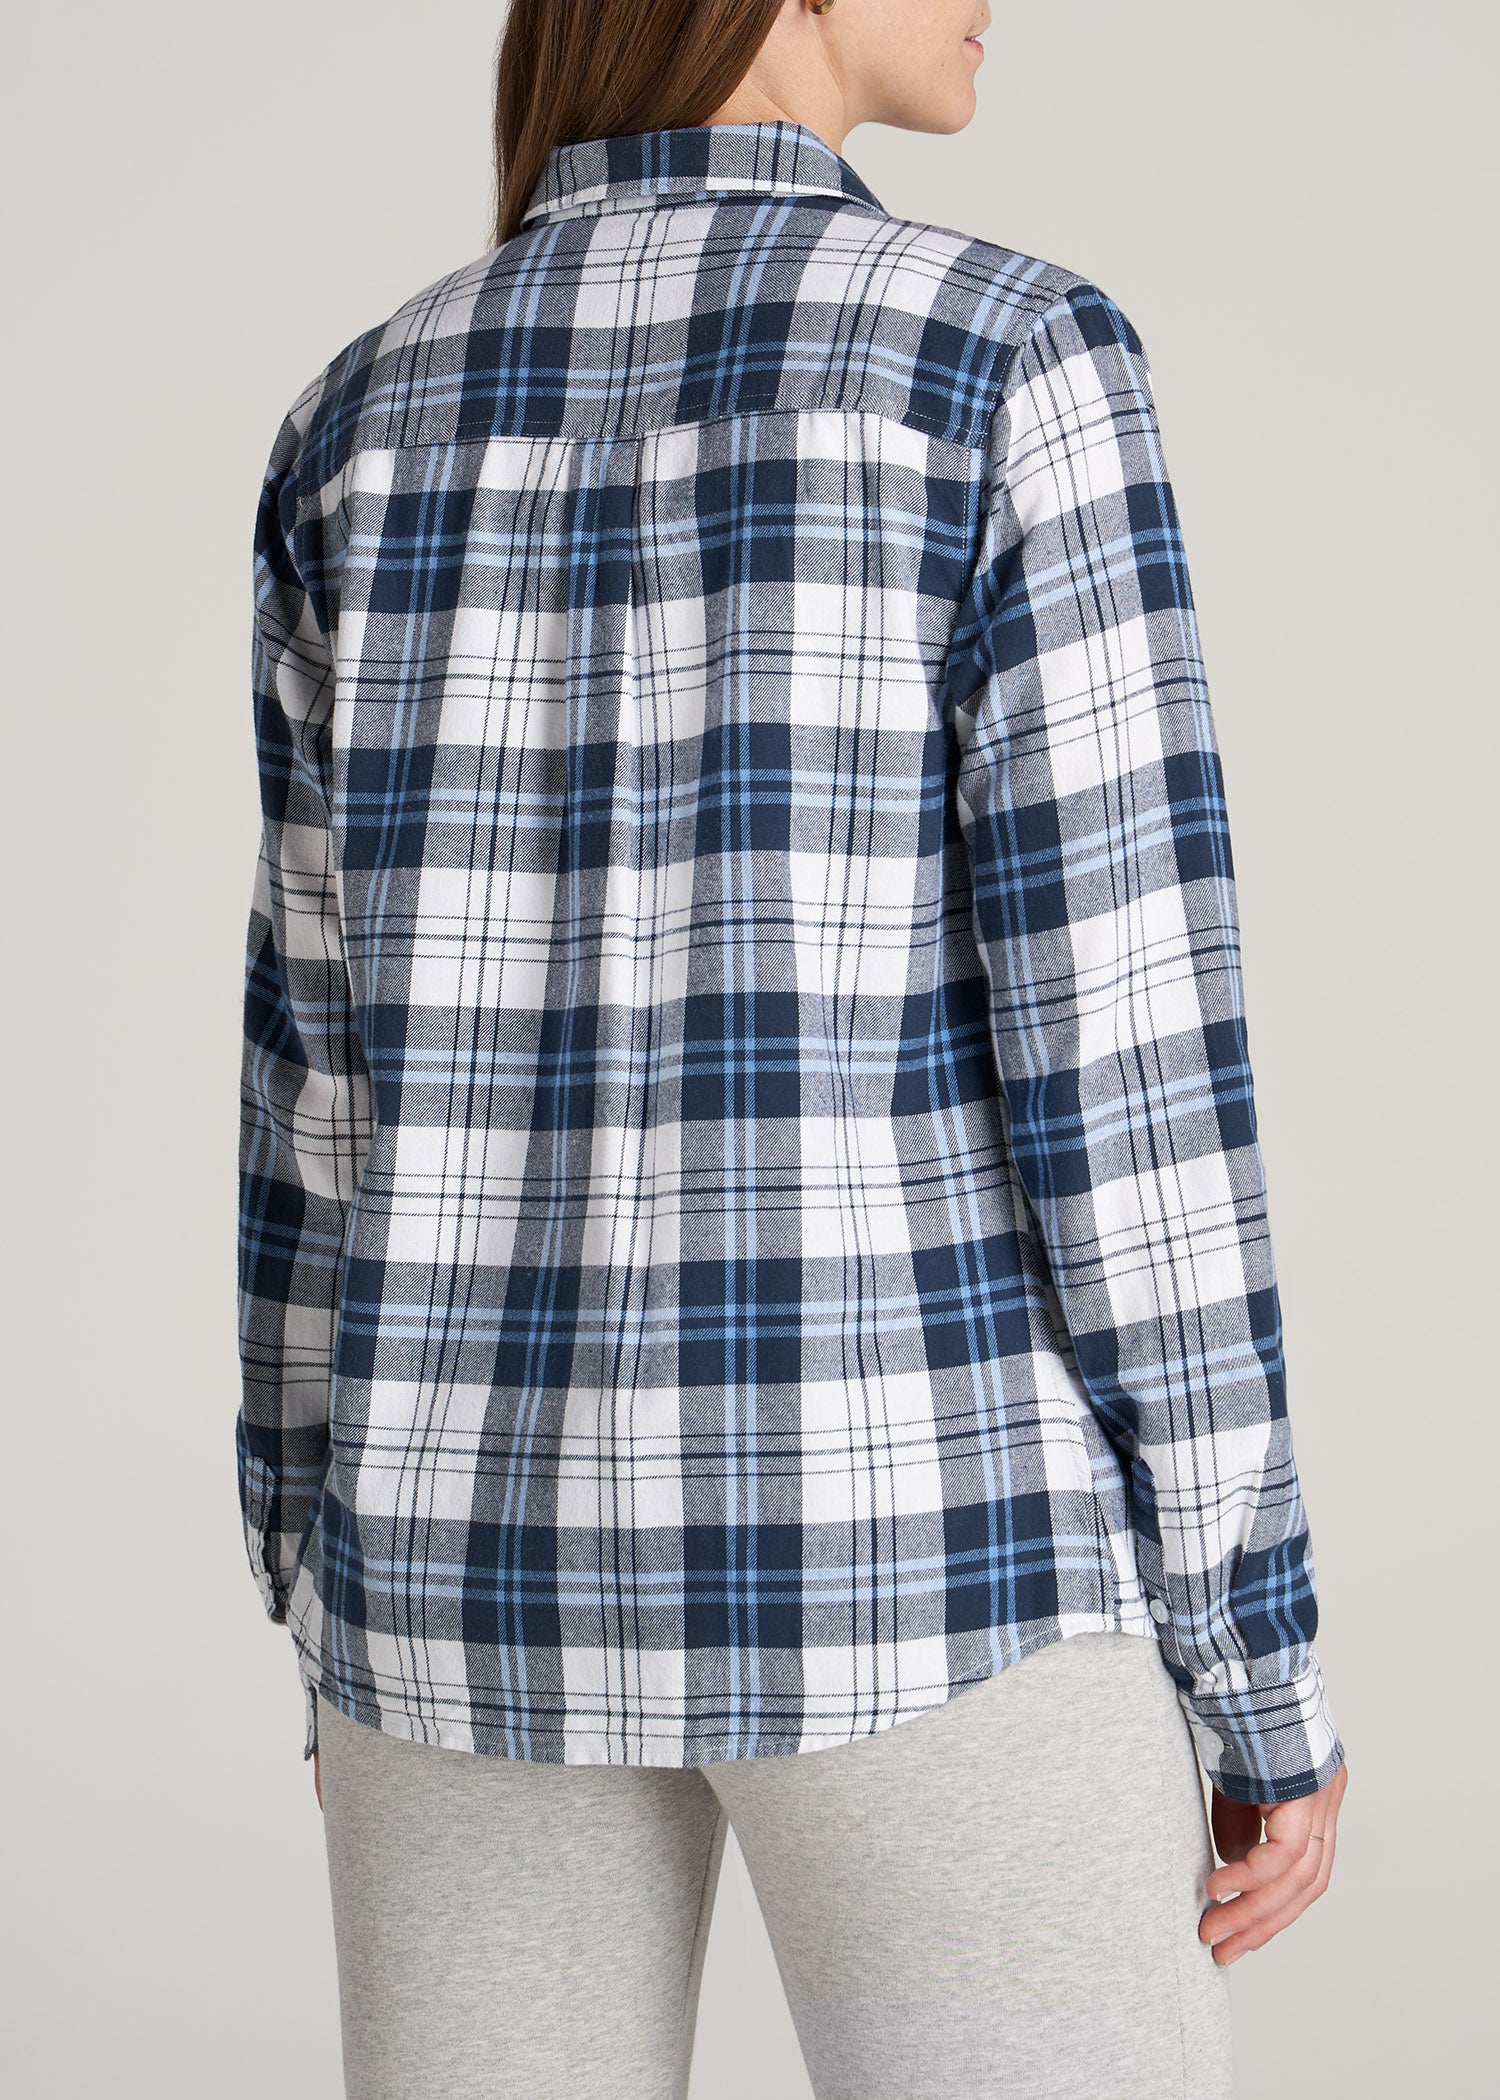    American-Tall-Women-Flannel-Button-up-Shirt-Blue-White-Plaid-back